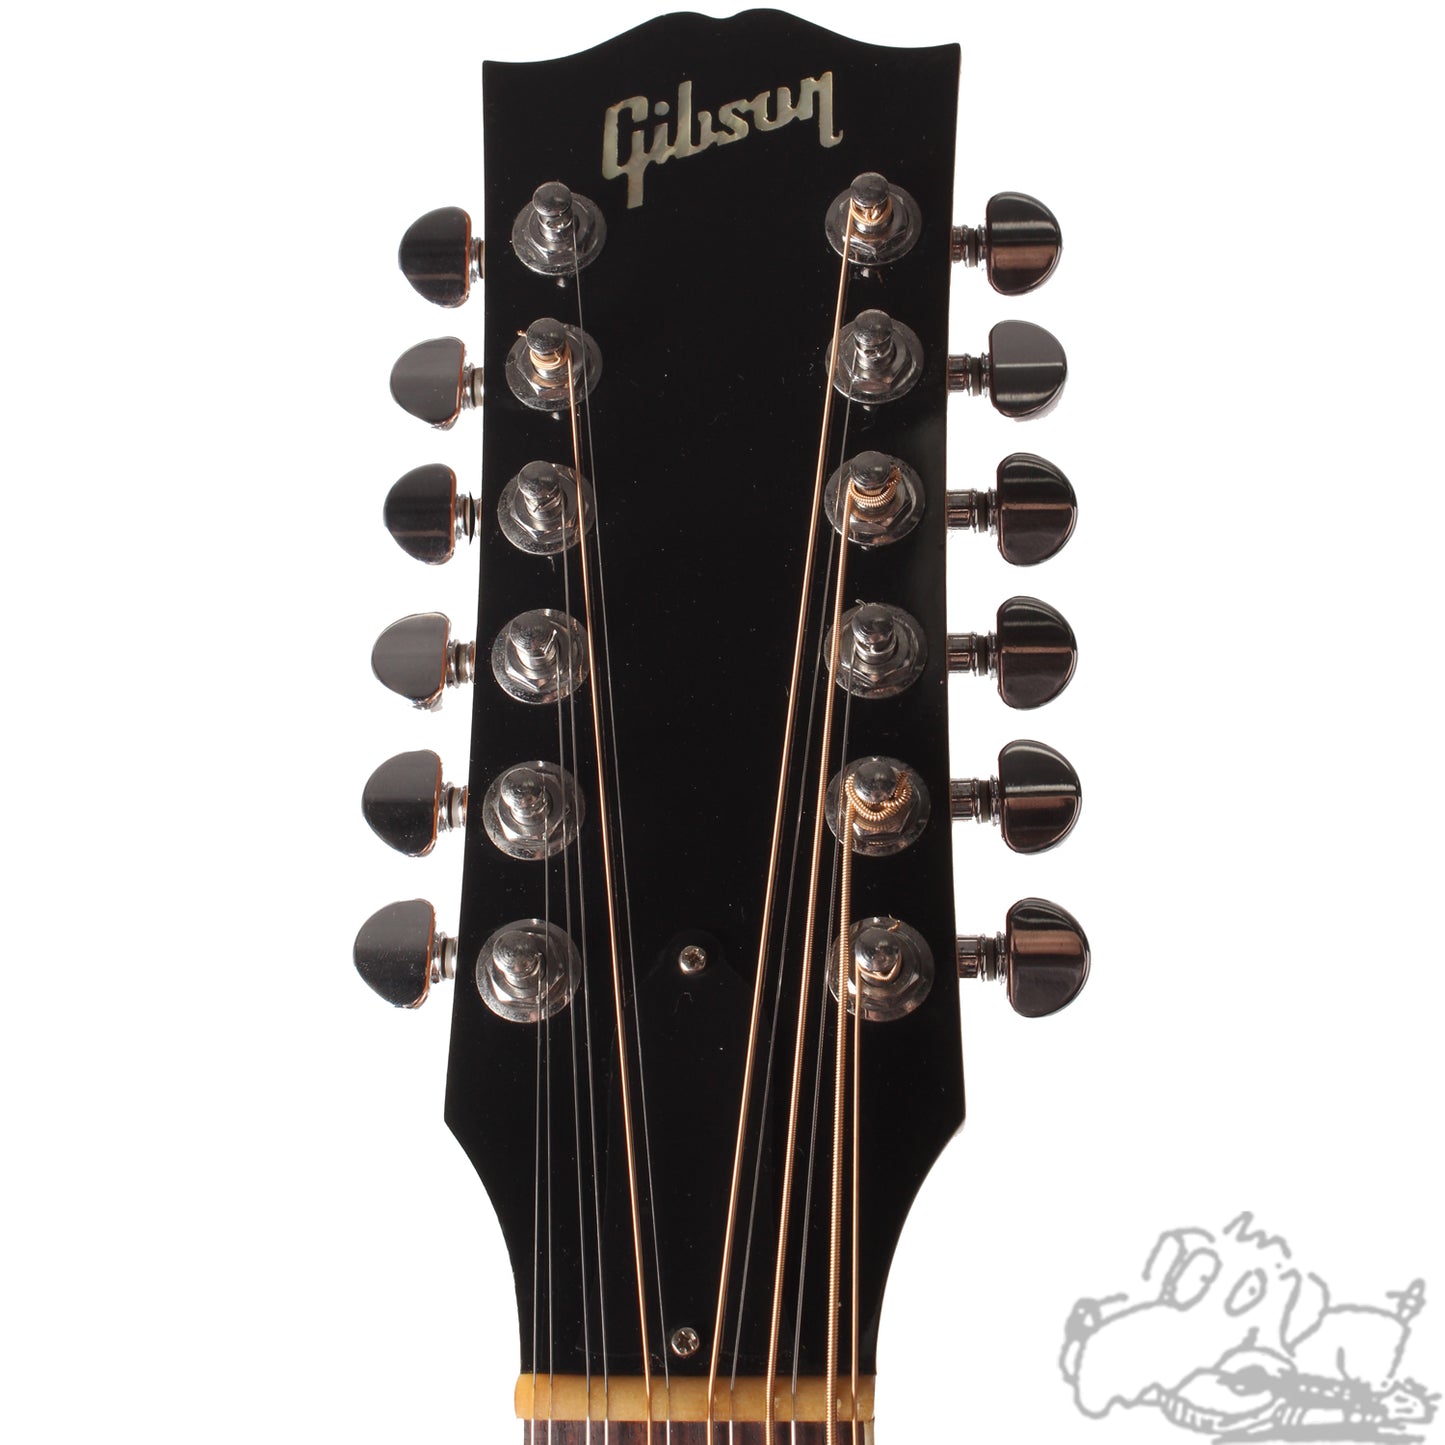 2005 Gibson J-185 12 Lefthanded